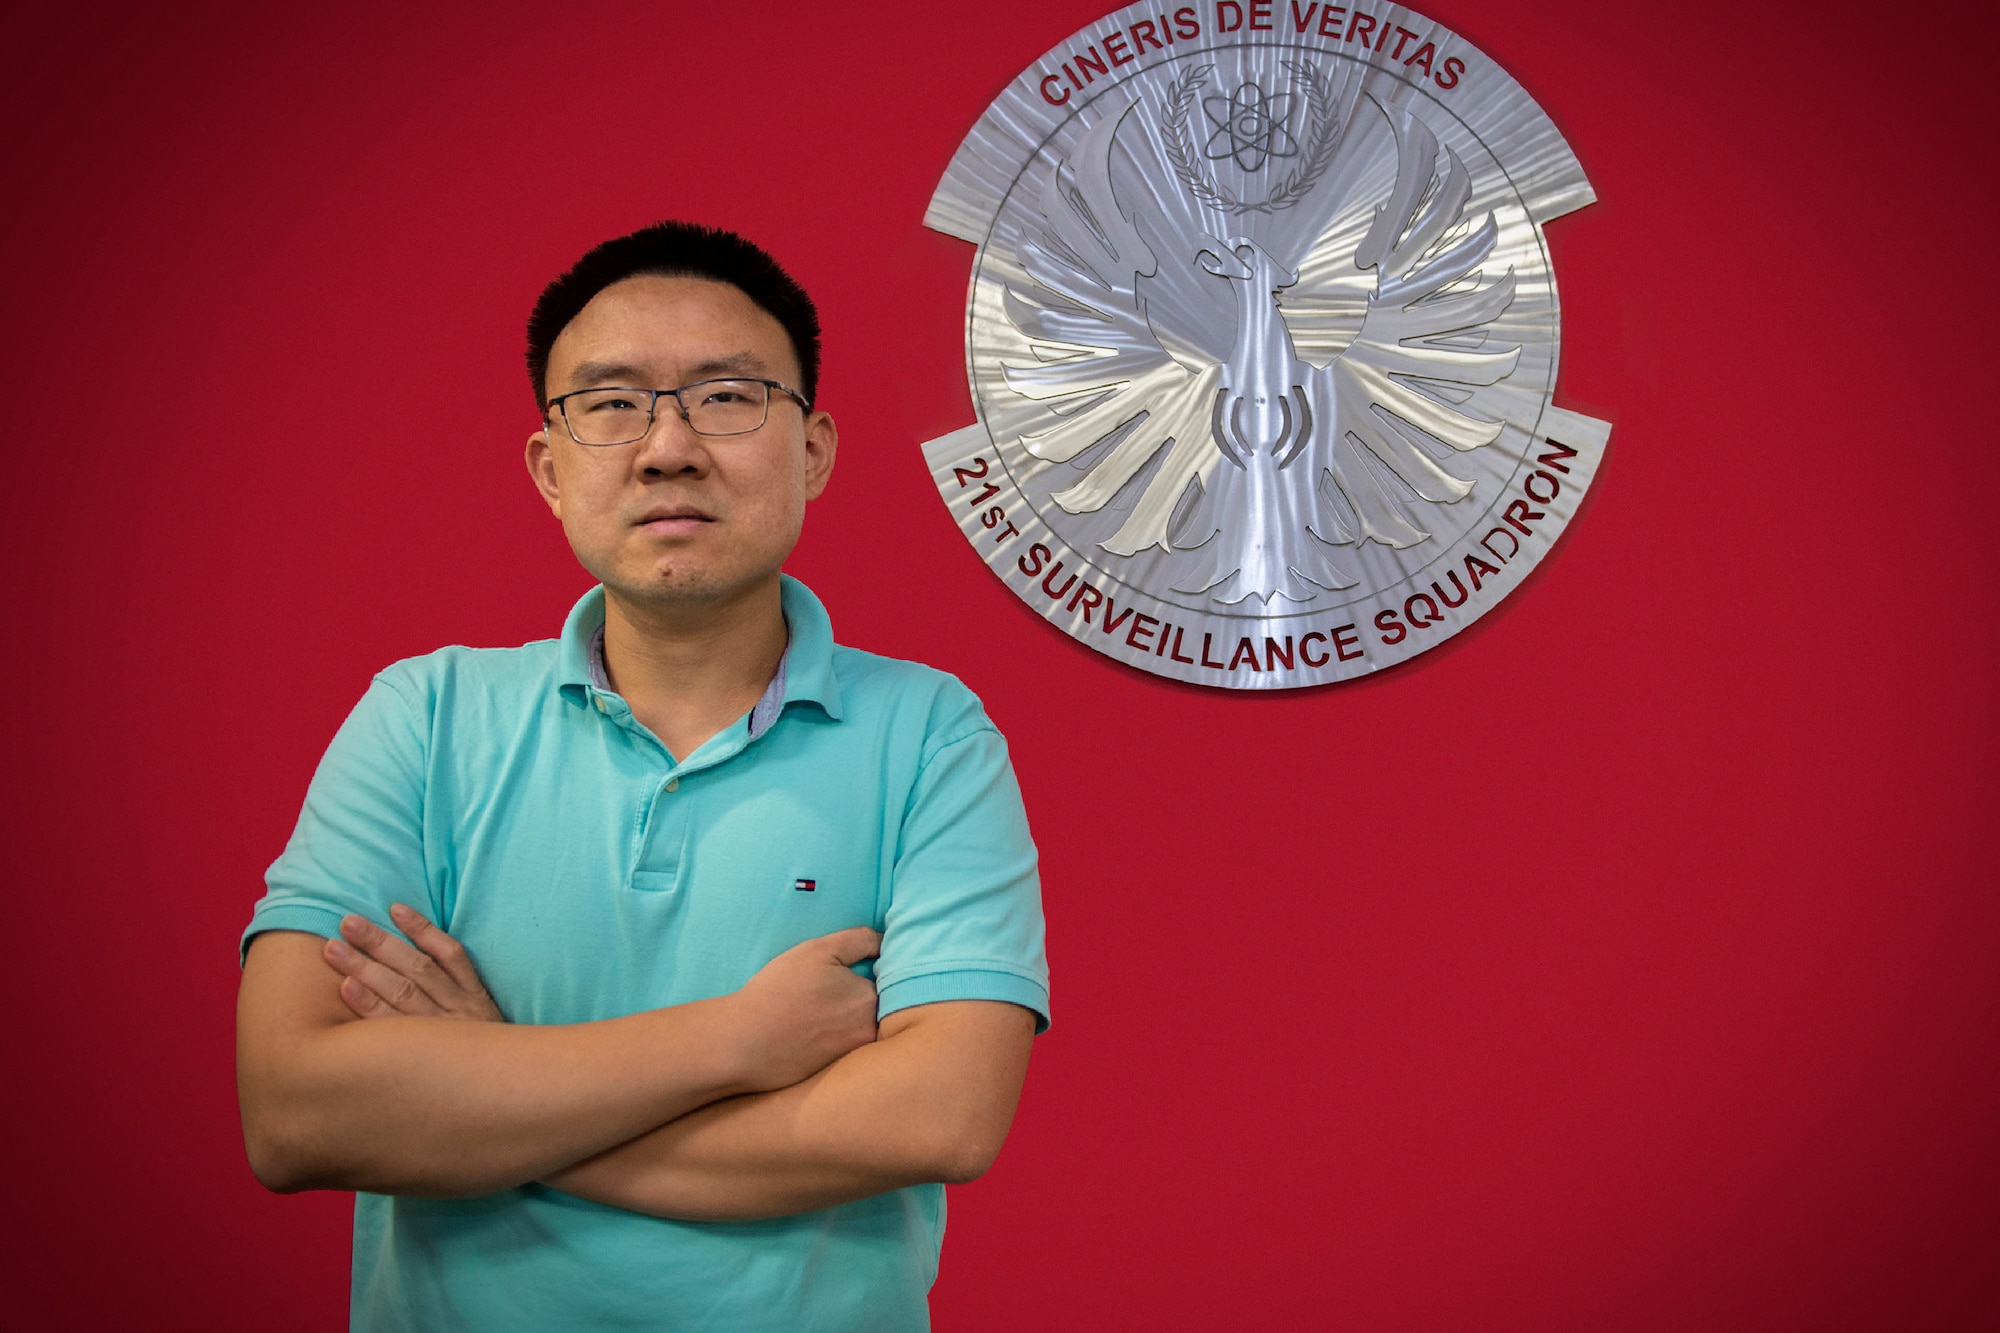 Le Chen, a statistician with the 21st Surveillance Squadron at Patrick Space Force Base, Fla., was hired in August 2022 to work at the Department of Defense’s sole nuclear treaty monitoring center.  His role is to use mathematical formulas and techniques to analyze and interpret copious amounts of technical data the Air Force Technical Applications Center receives on a daily basis.  Chen is also deaf and communicates almost exclusively using sign language.  (U.S. Air Force photo by Matthew S. Jurgens)